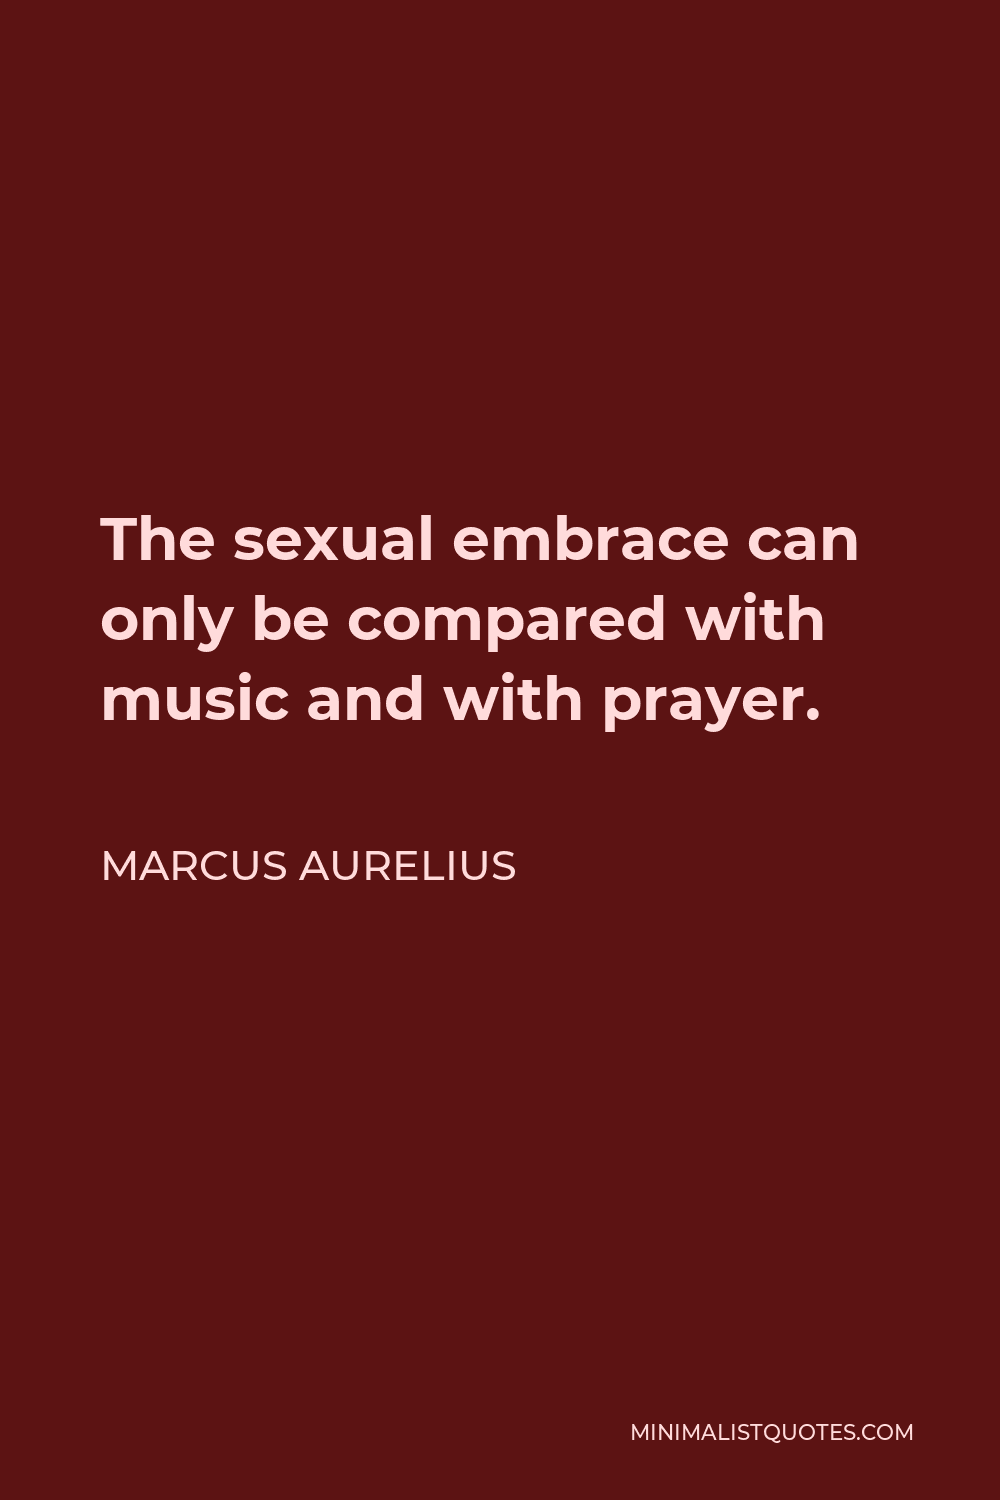 Marcus Aurelius Quote - The sexual embrace can only be compared with music and with prayer.